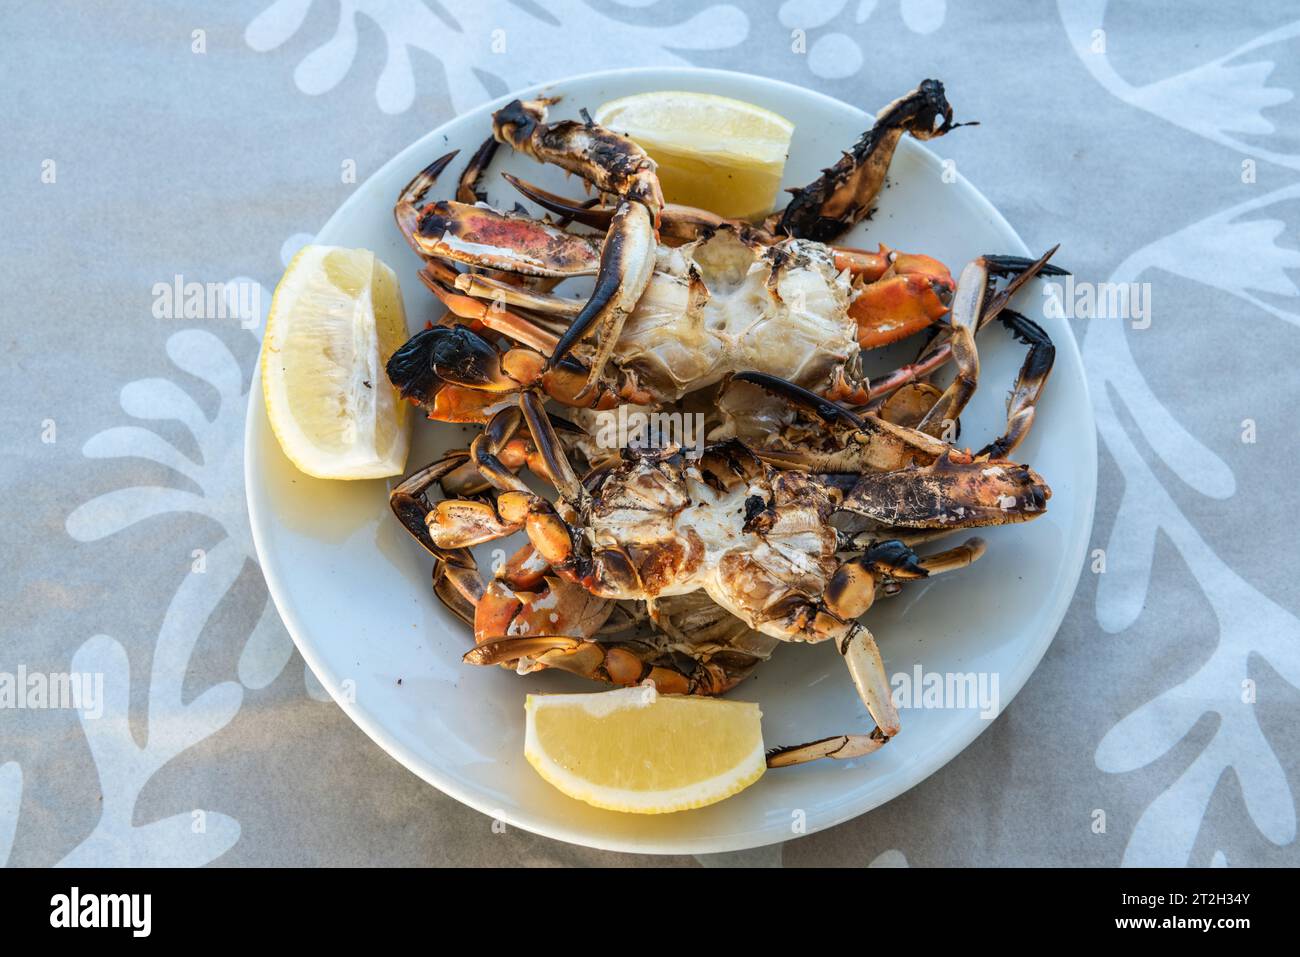 Plate of cooked blue crab (Callinectes sapidus) in Turkey. Stock Photo